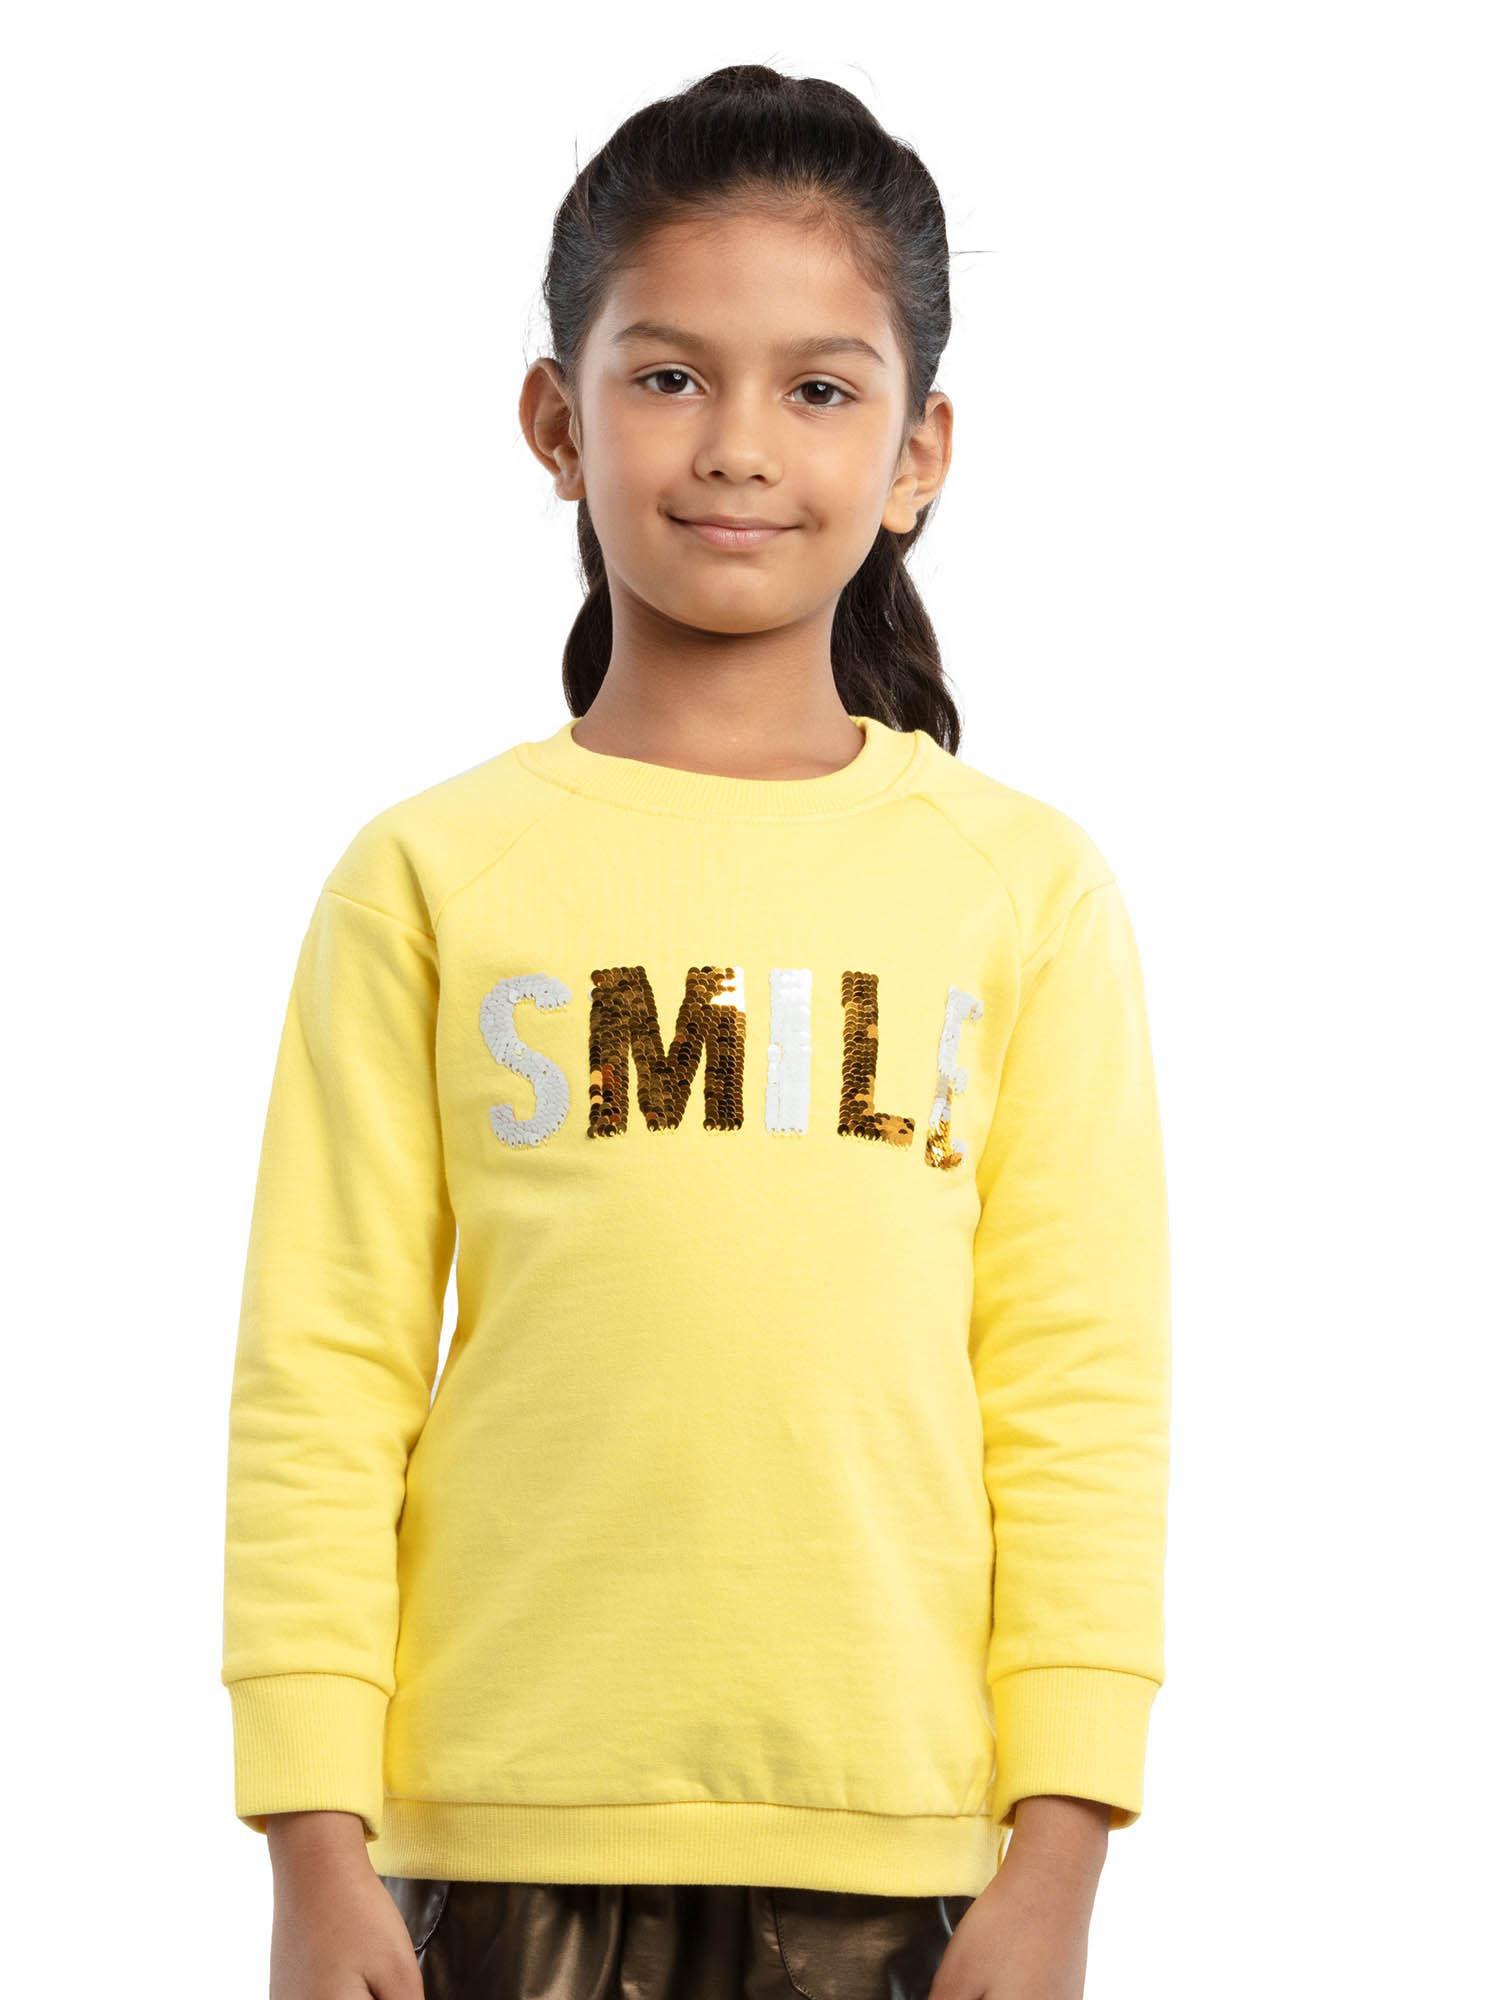 Girls Full Sleeve Sweatshirt with Sequence On Chest